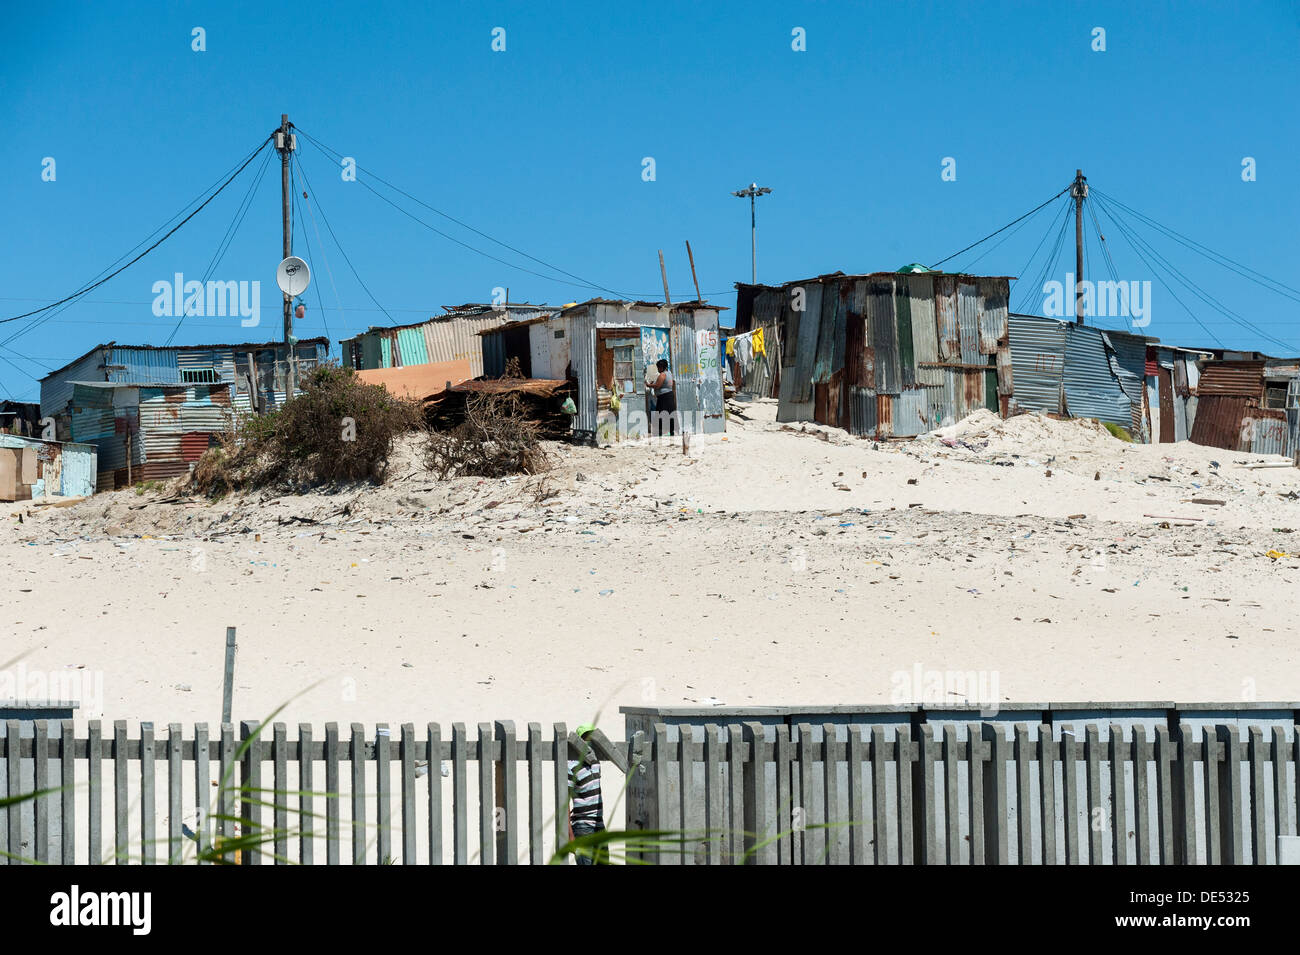 Tin shacks behind a fence in Khayelitsha, a partially informal township in Cape Town, South Africa Stock Photo